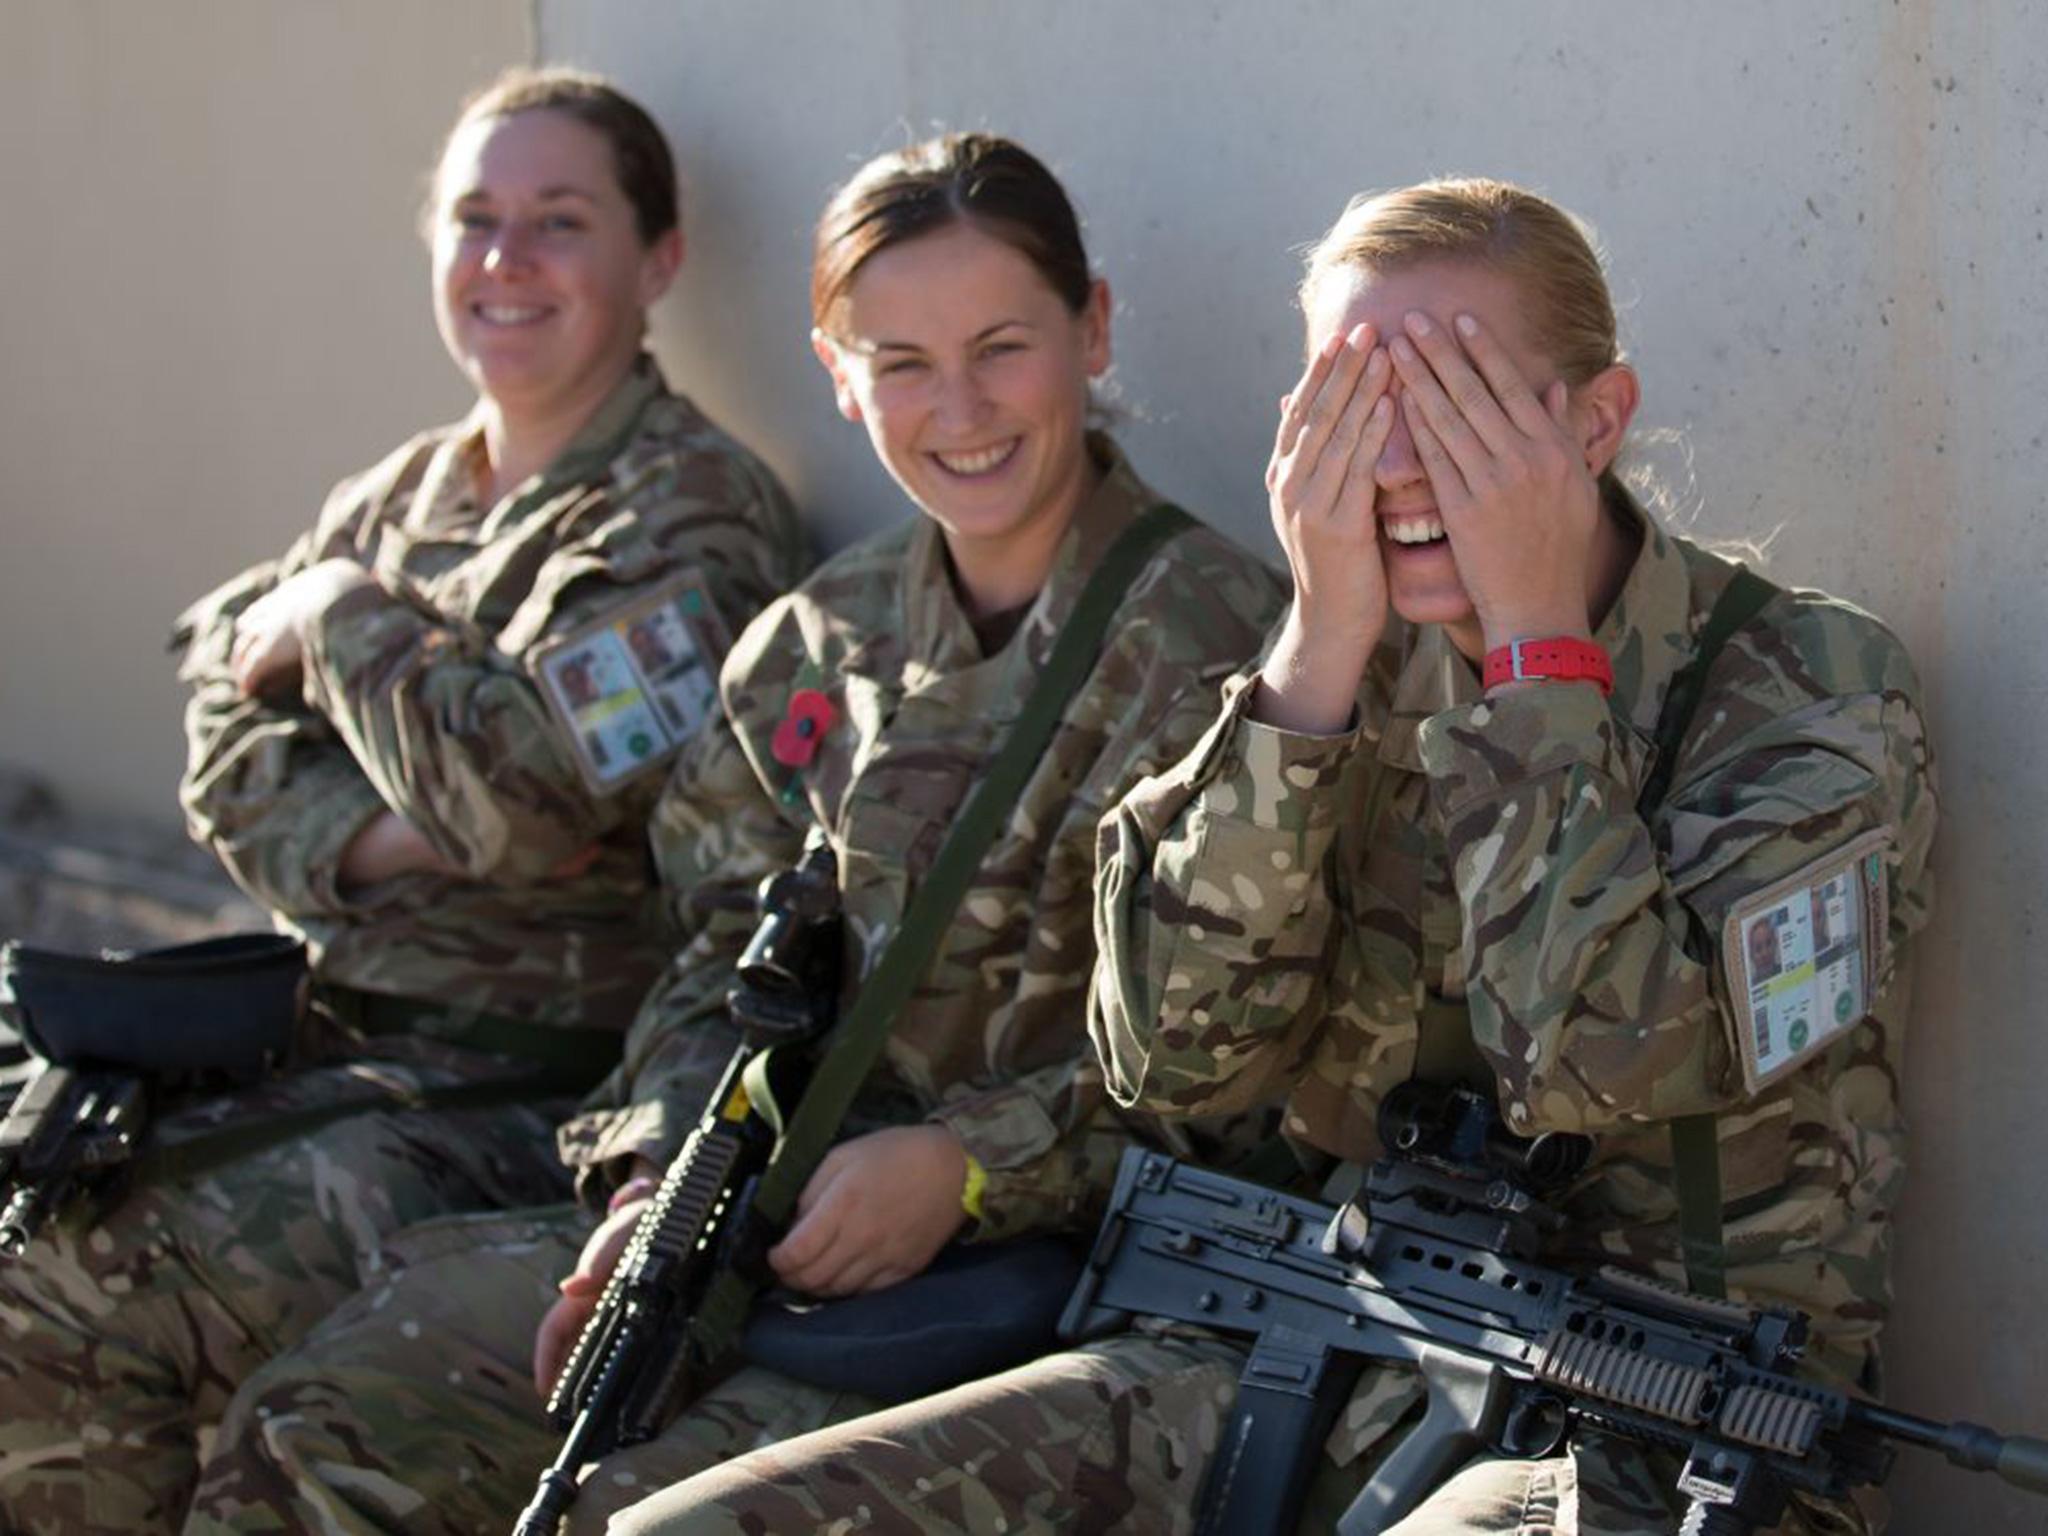 https://static.independent.co.uk/s3fs-public/thumbnails/image/2015/11/28/21/Female-Soldiers.jpg